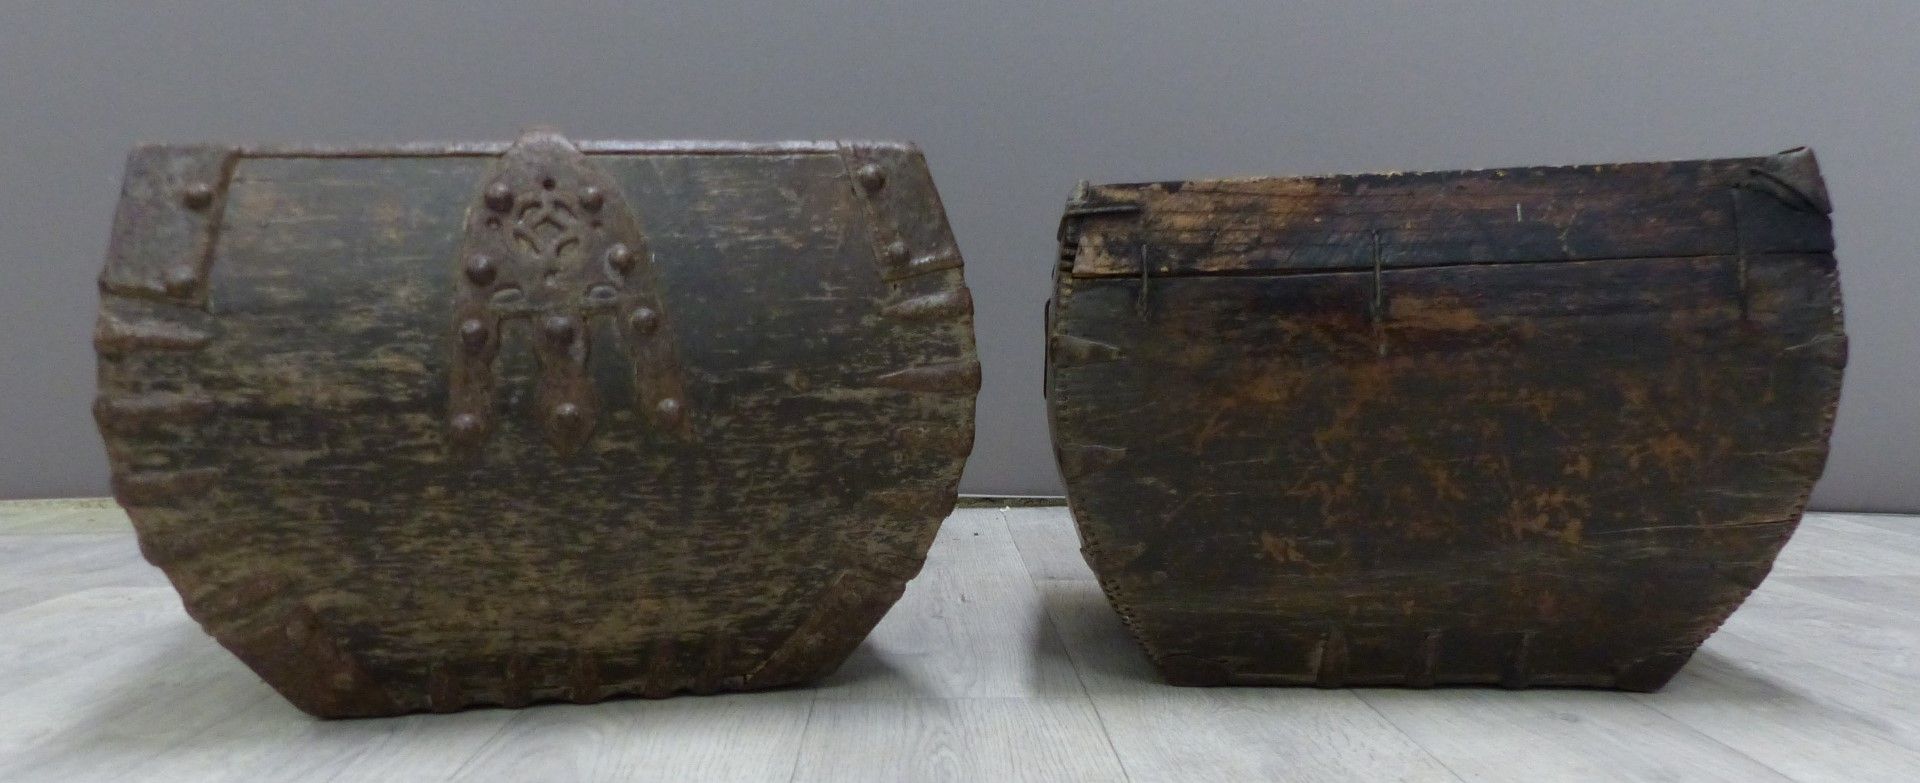 Two metal bound vintage trugs, possibly 19thC or earlier